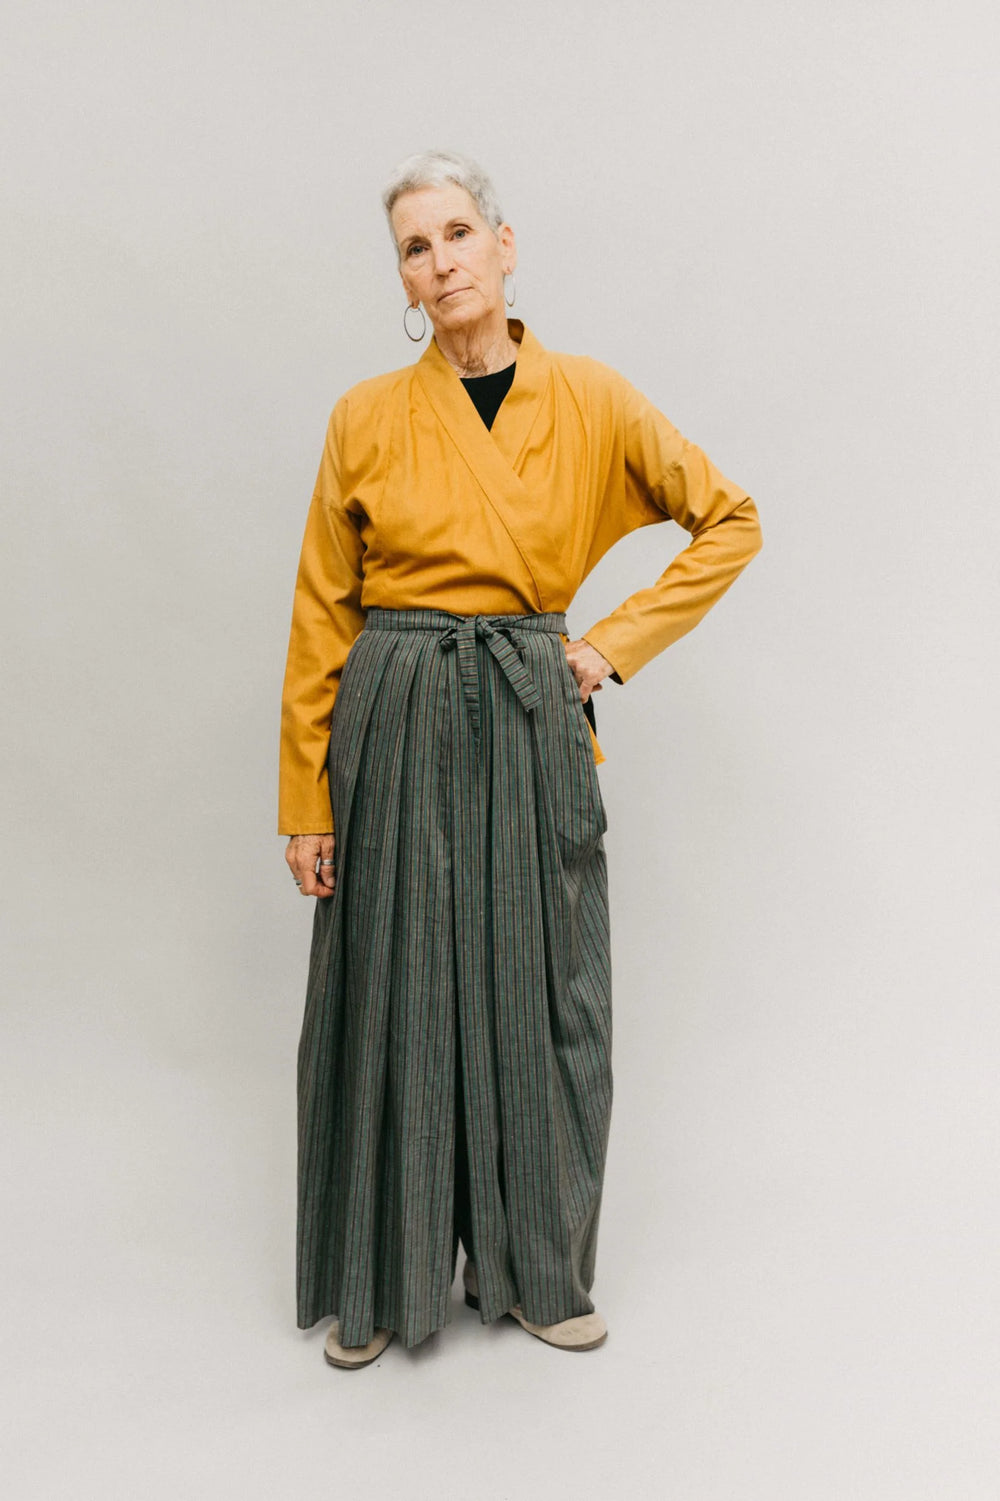 Woman wearing the 151 Japanese Hakama and Kataginu sewing pattern from Folkwear on The Fold Line. A pleated front vest and pleated trousers/skirt pattern made in cottons, linens, linen blends, ramie, hemp, silks, satin or taffeta fabrics, featuring a loos